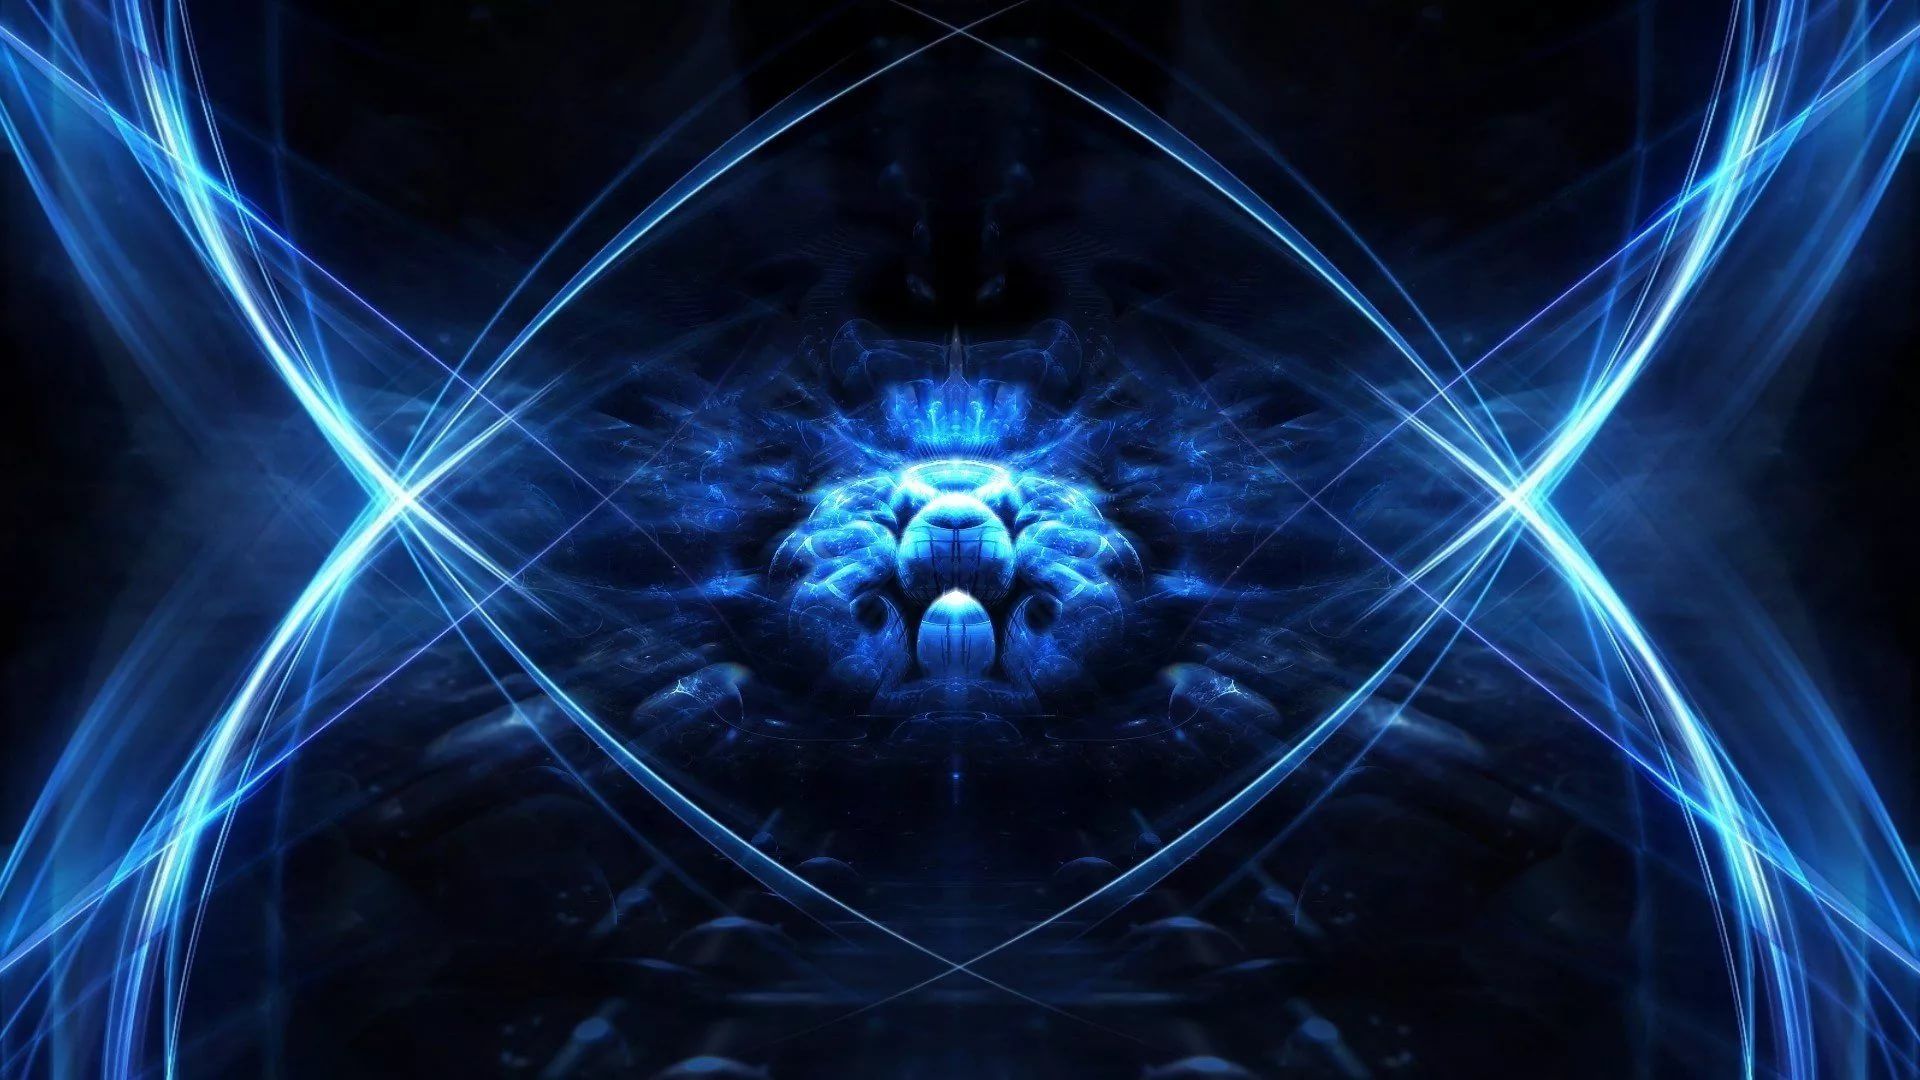 The Blue Spirit Wallpapers